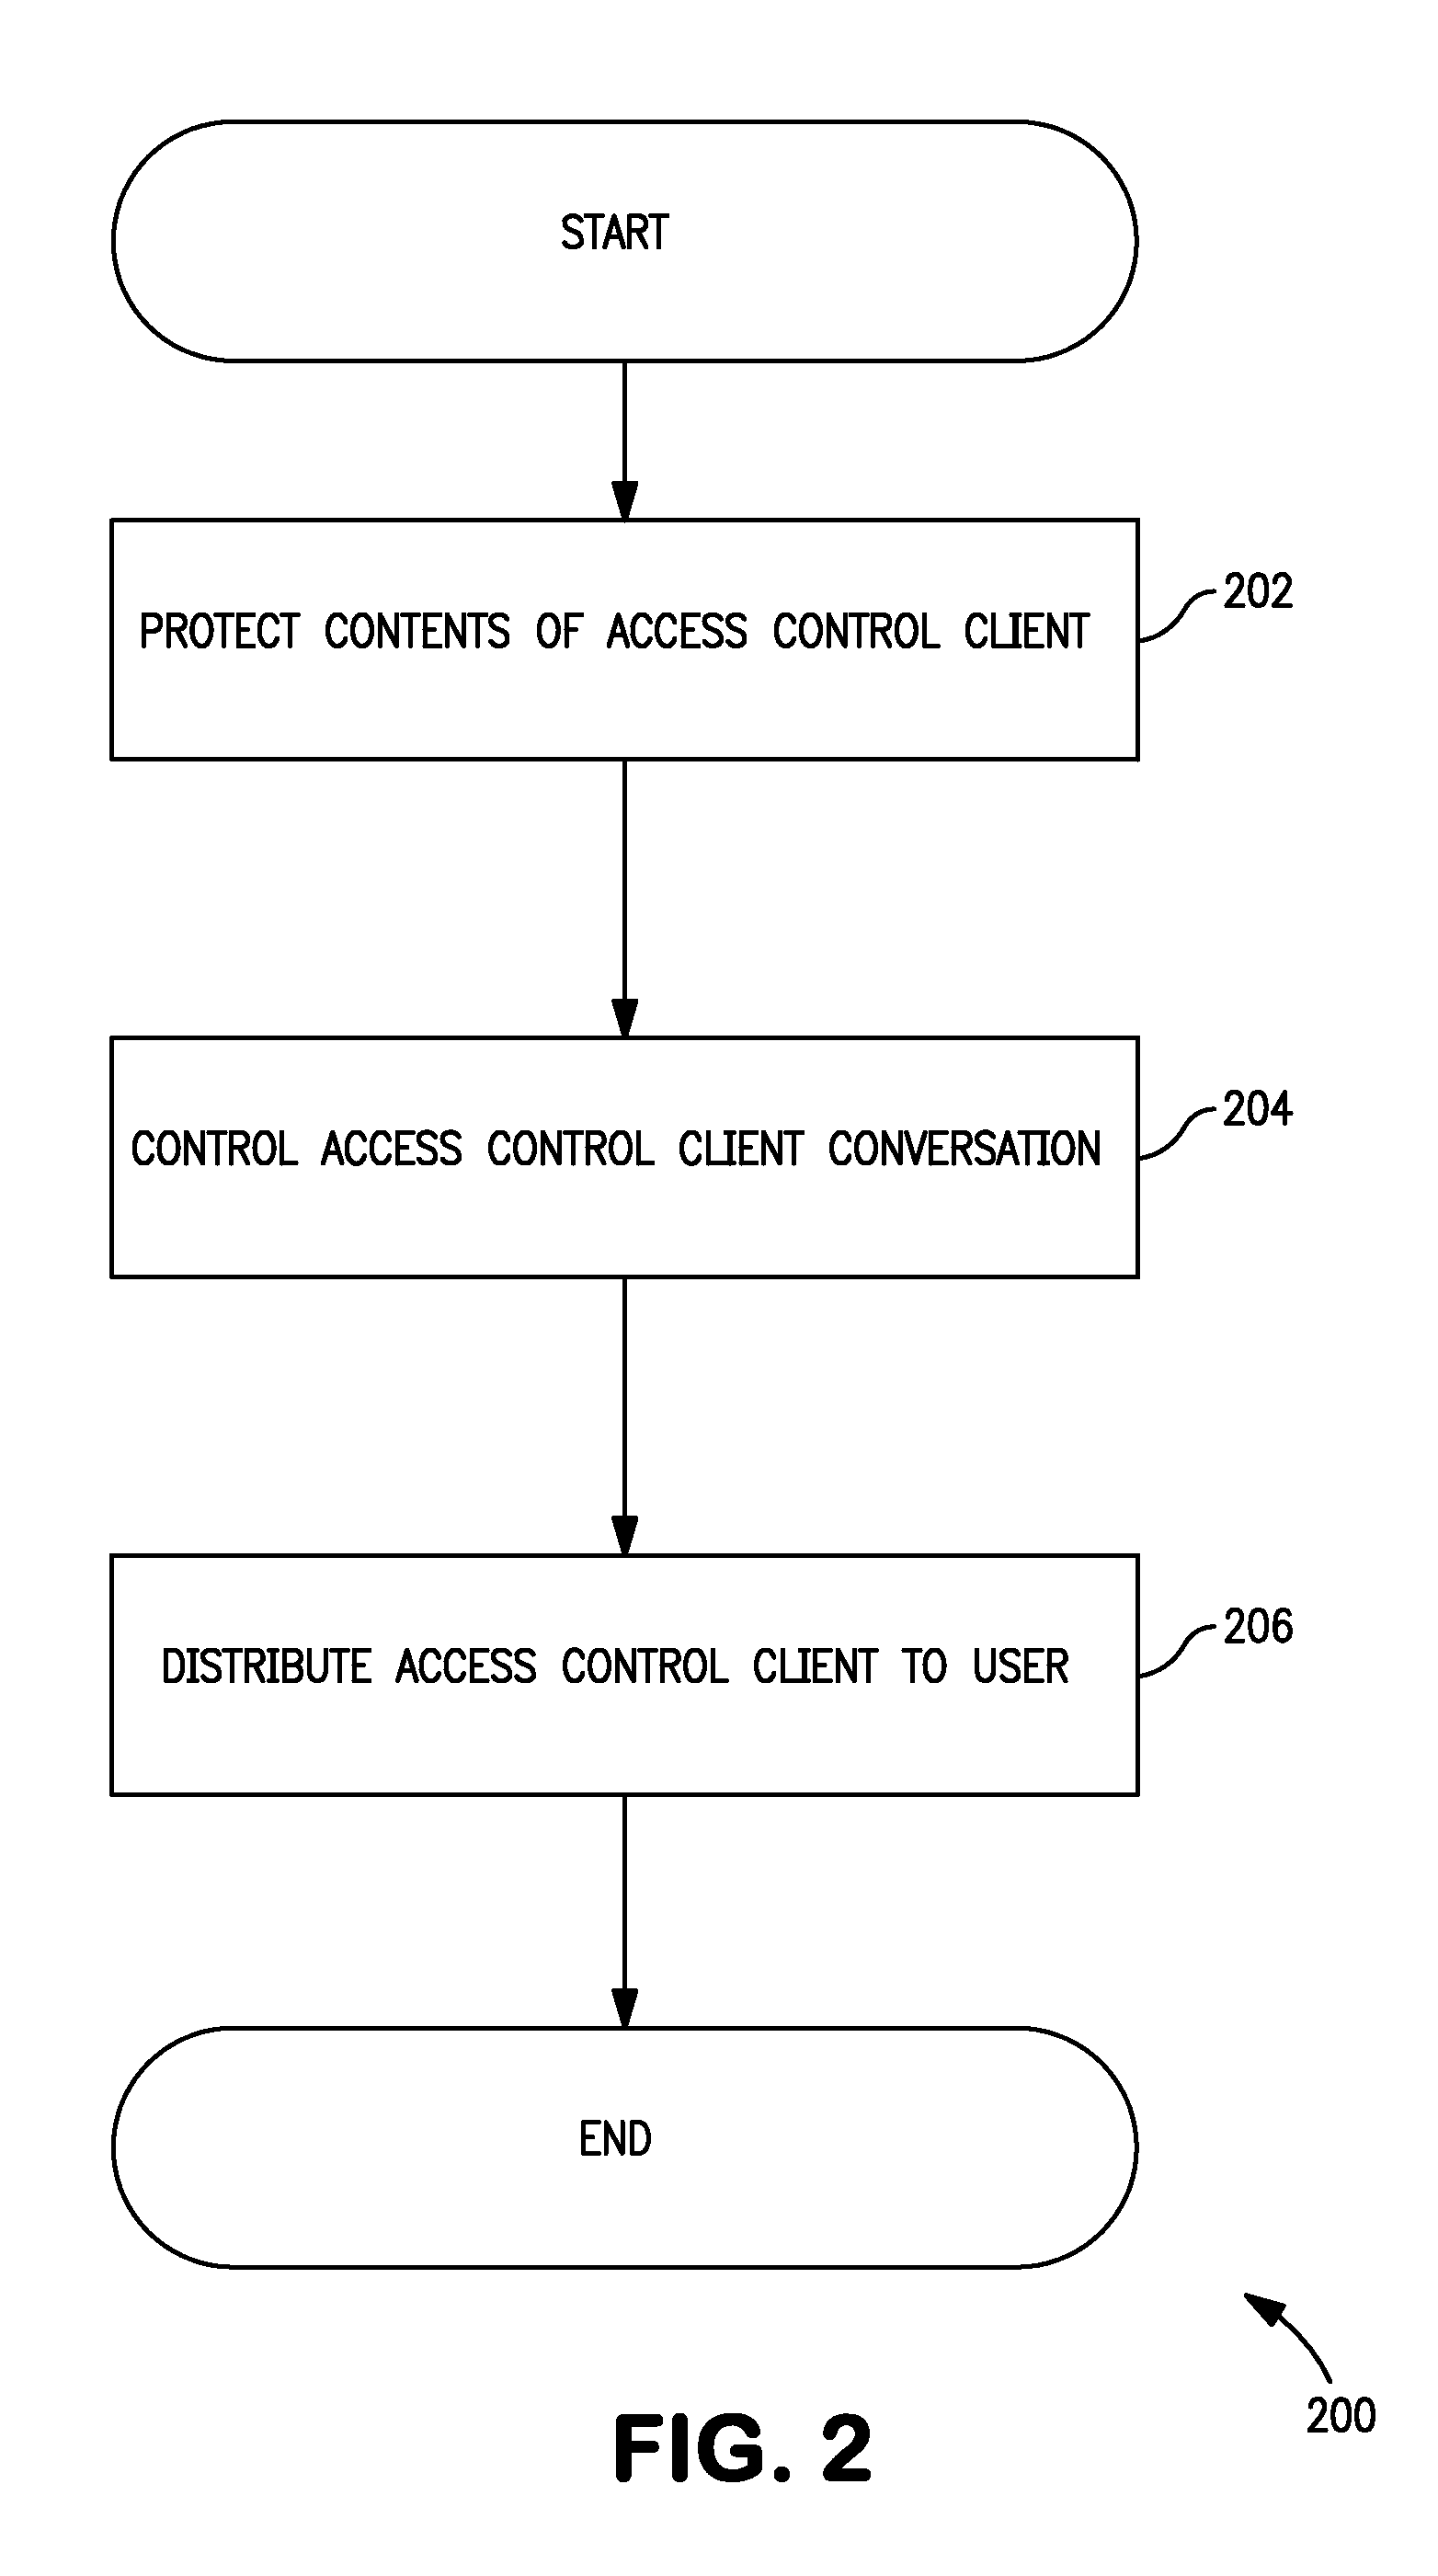 Electronic access client distribution apparatus and methods